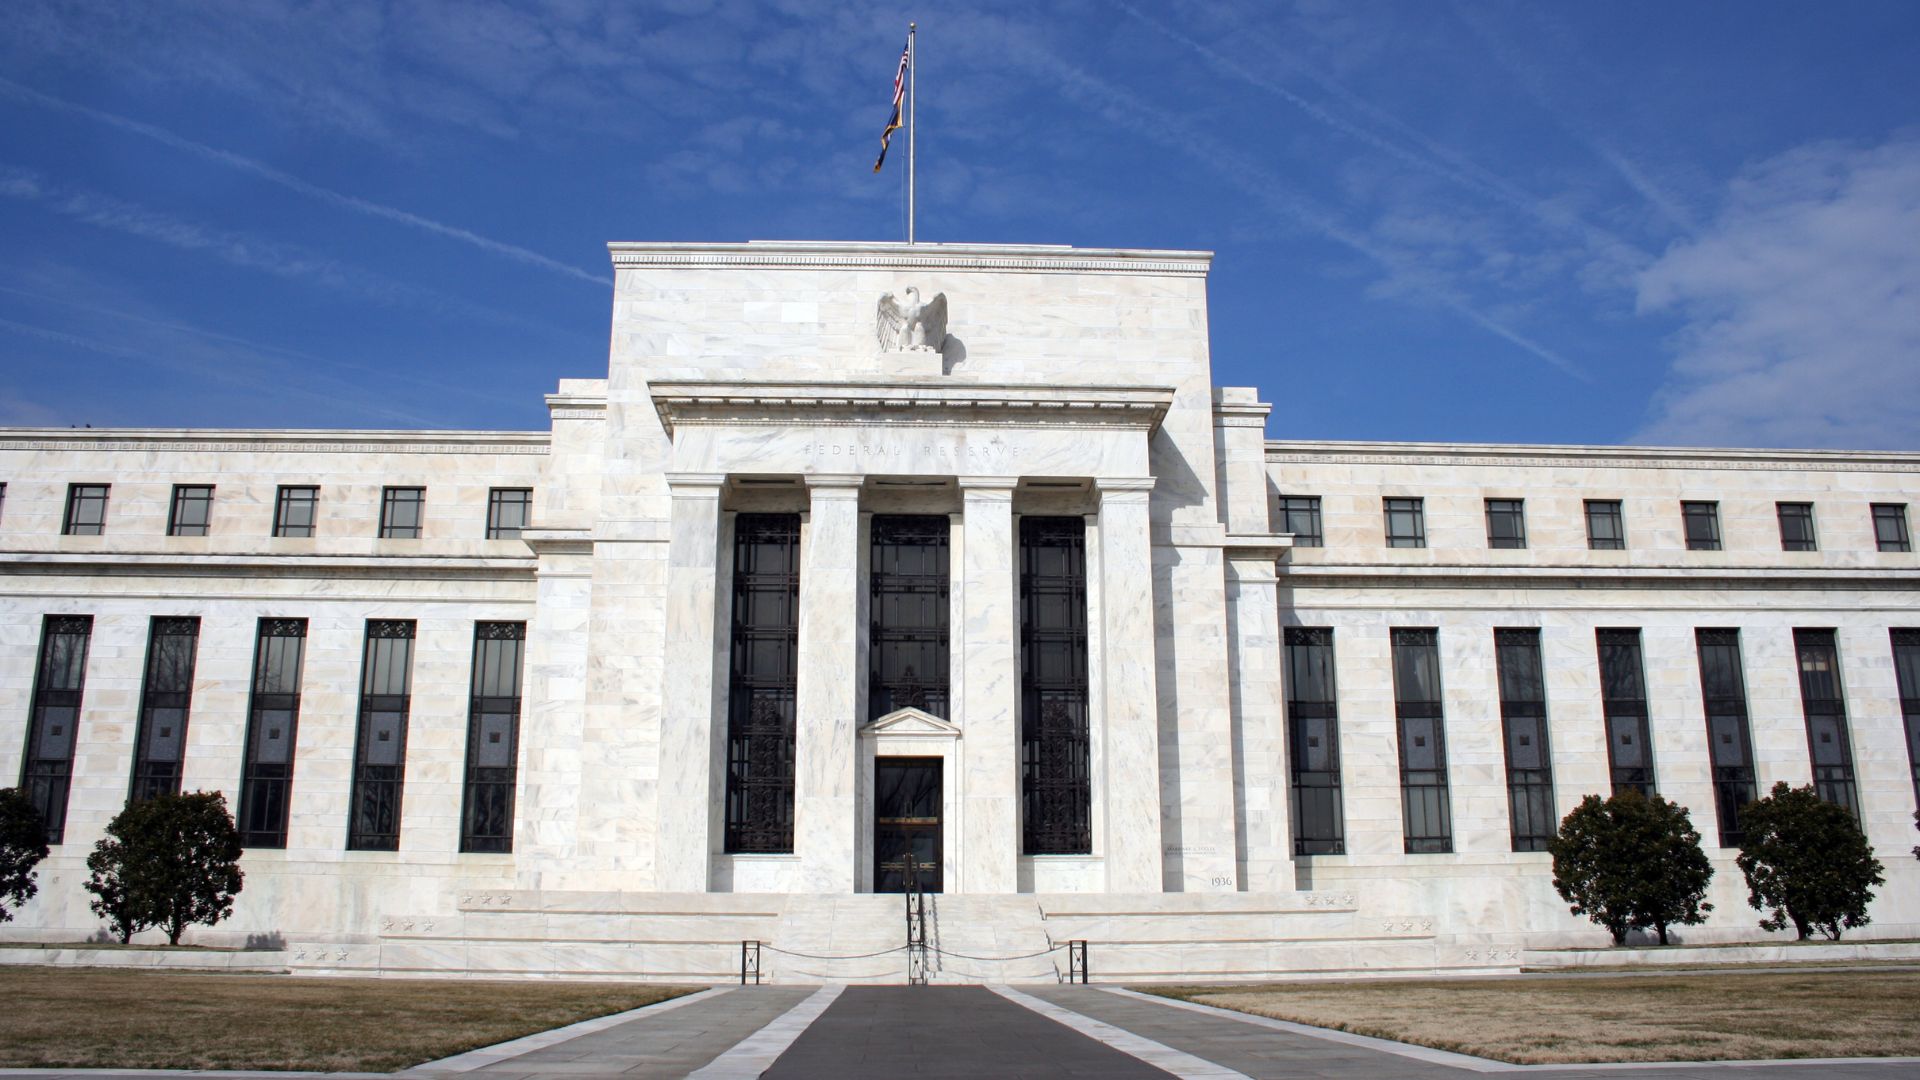 LATEST FED FINANCIAL STABILITY REPORT HIGHLIGHTS RISKS BUT SAYS BANKS HAVE CAPITAL TO ABSORB POTENTIAL ECONOMIC SHOCKS